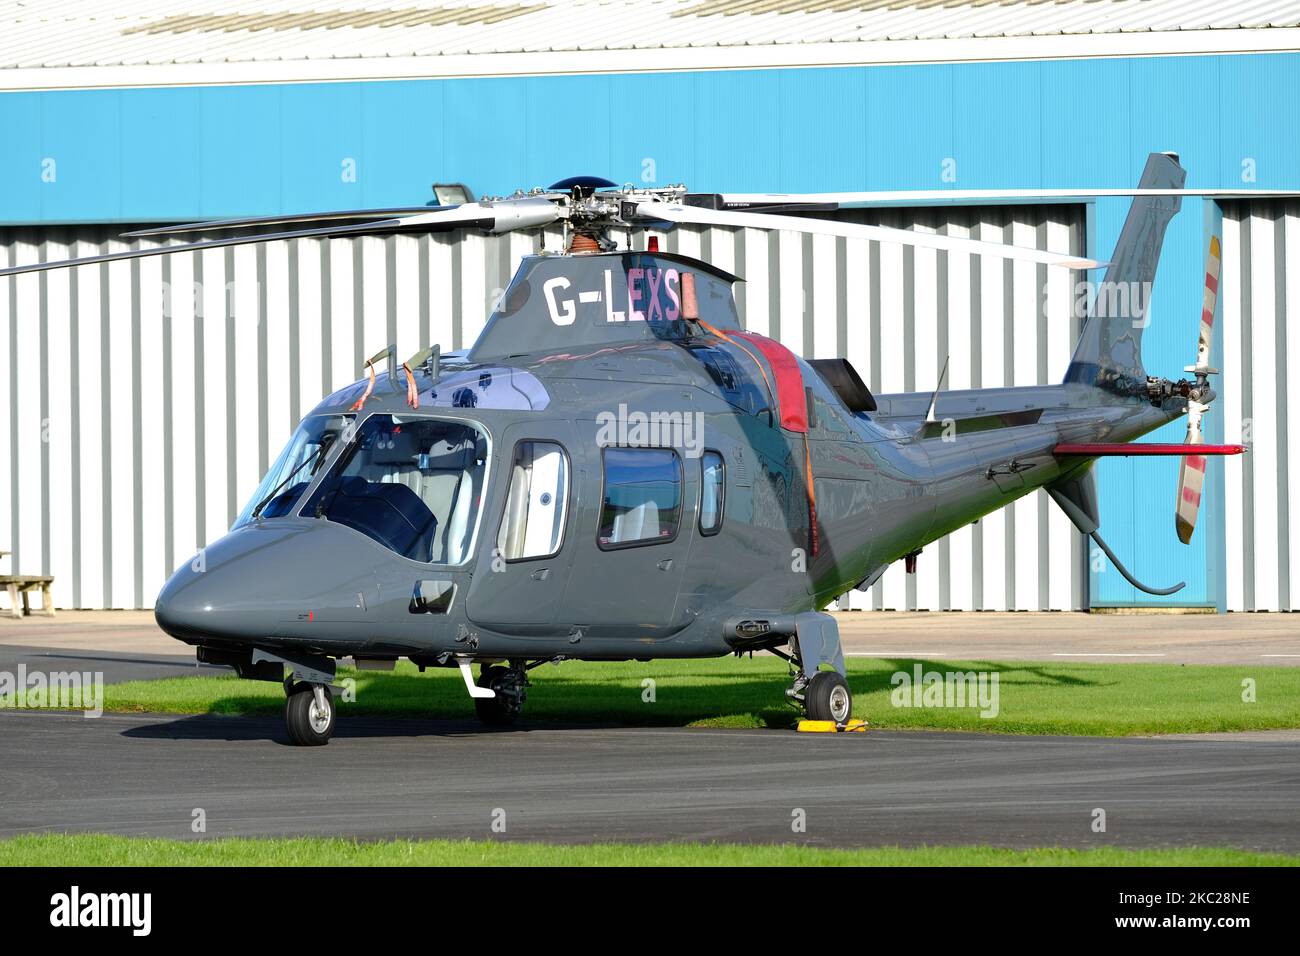 Agusta A109E helicopter often used for executive and corporate luxury air travel - registration G-LEXS Stock Photo